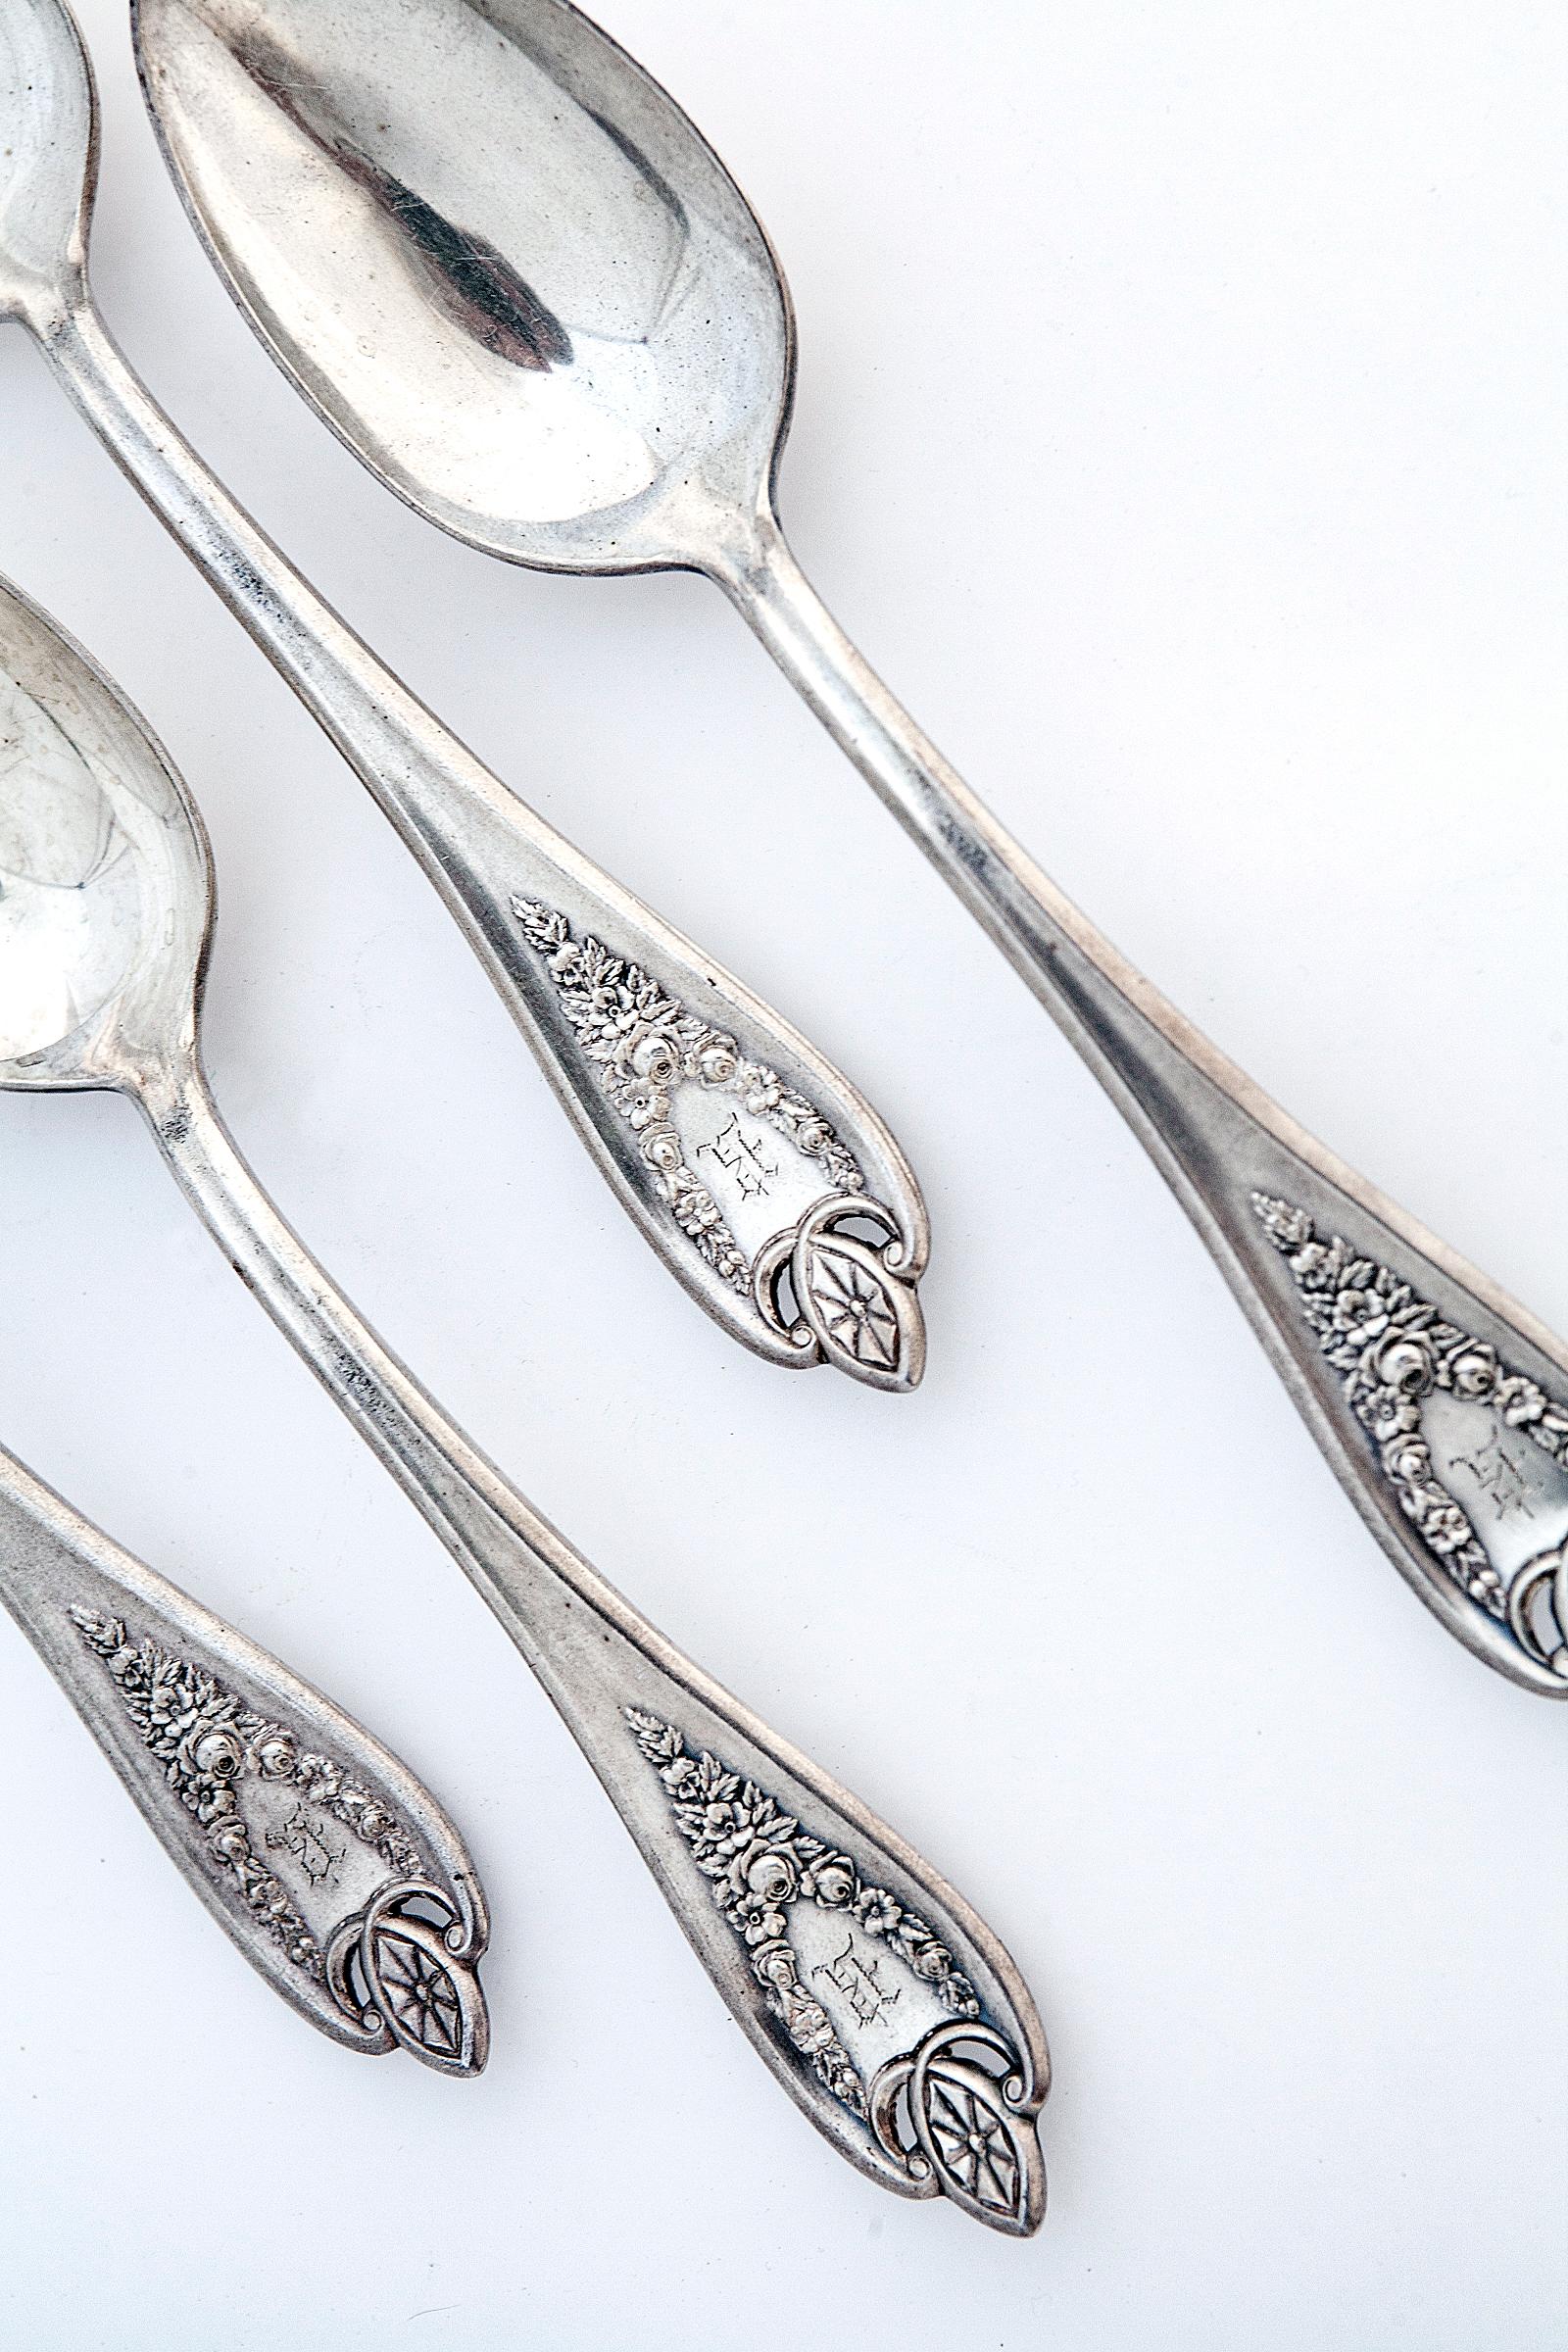 Set of Four American Monogramed Silverplate Tablespoons 